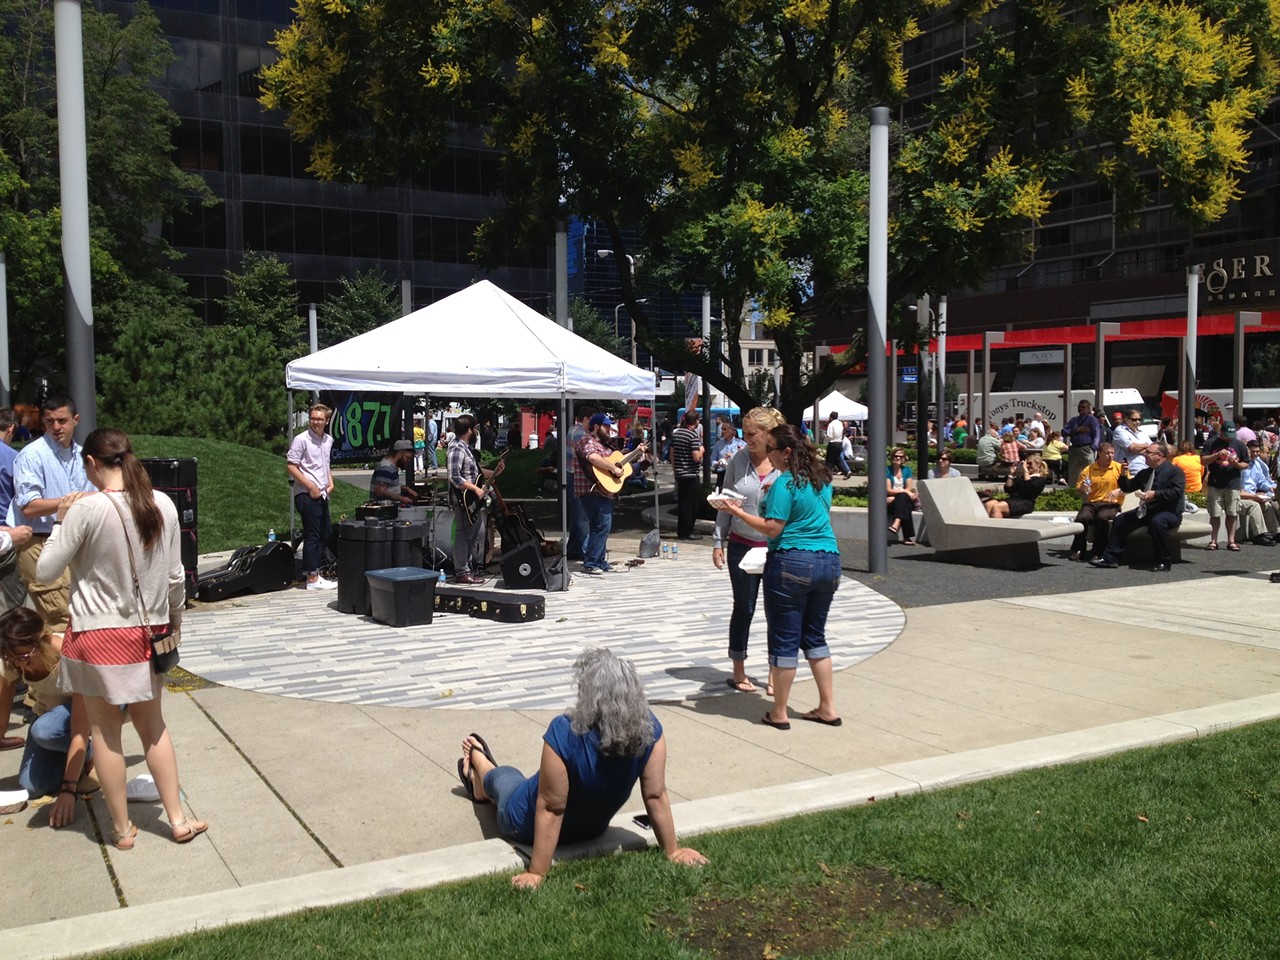 Lunch, Live Music, and Fun! Here's What you Missed at Walnut Wednesday Today